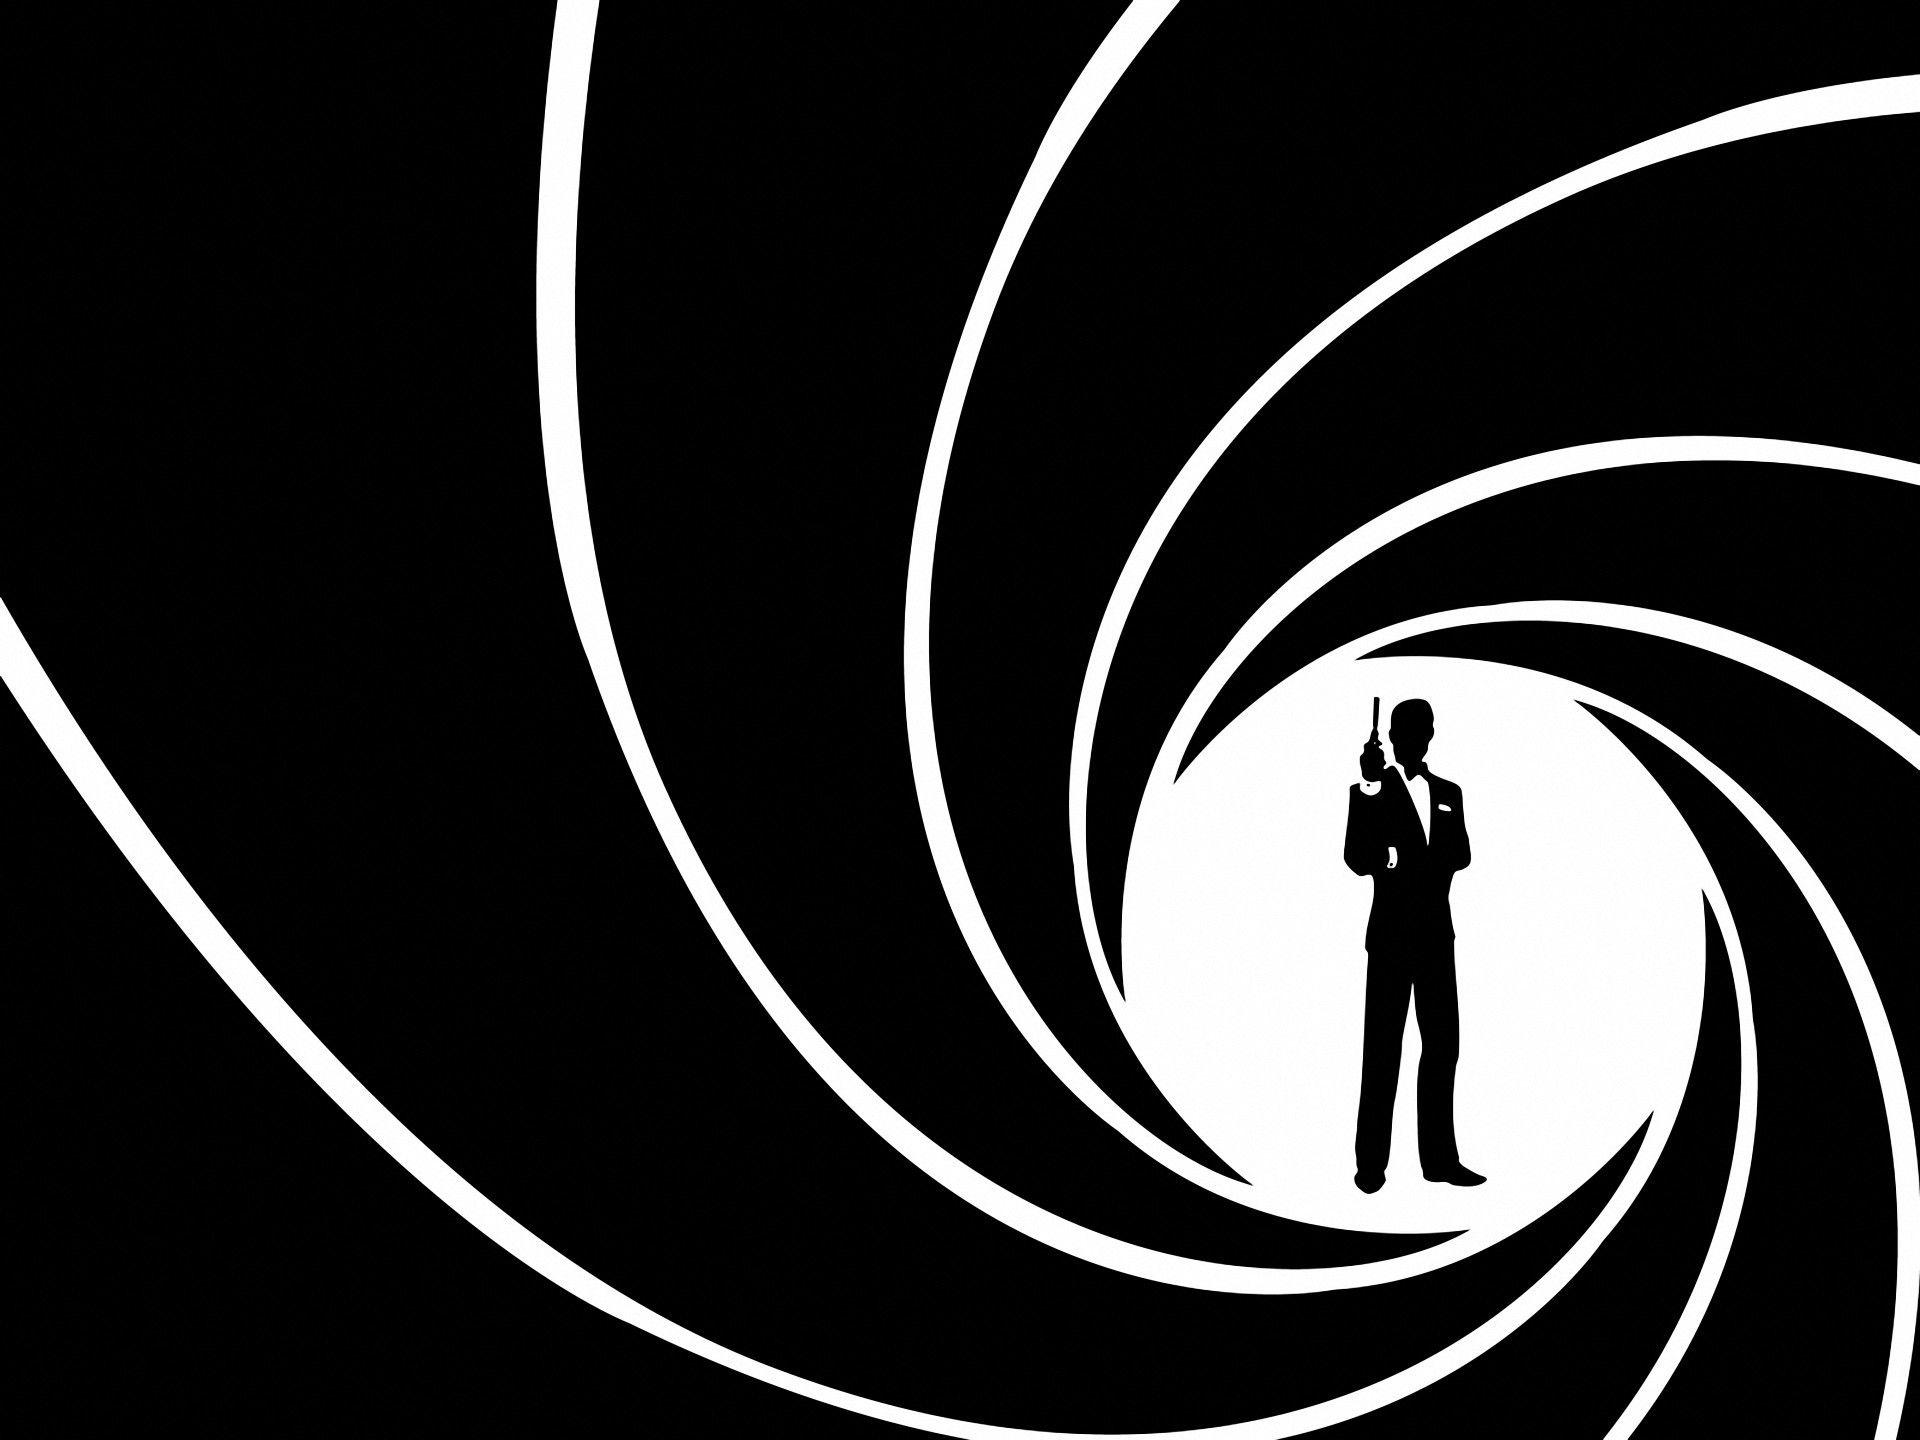 007 Wallpapers Top Free 007 Backgrounds Wallpaperaccess